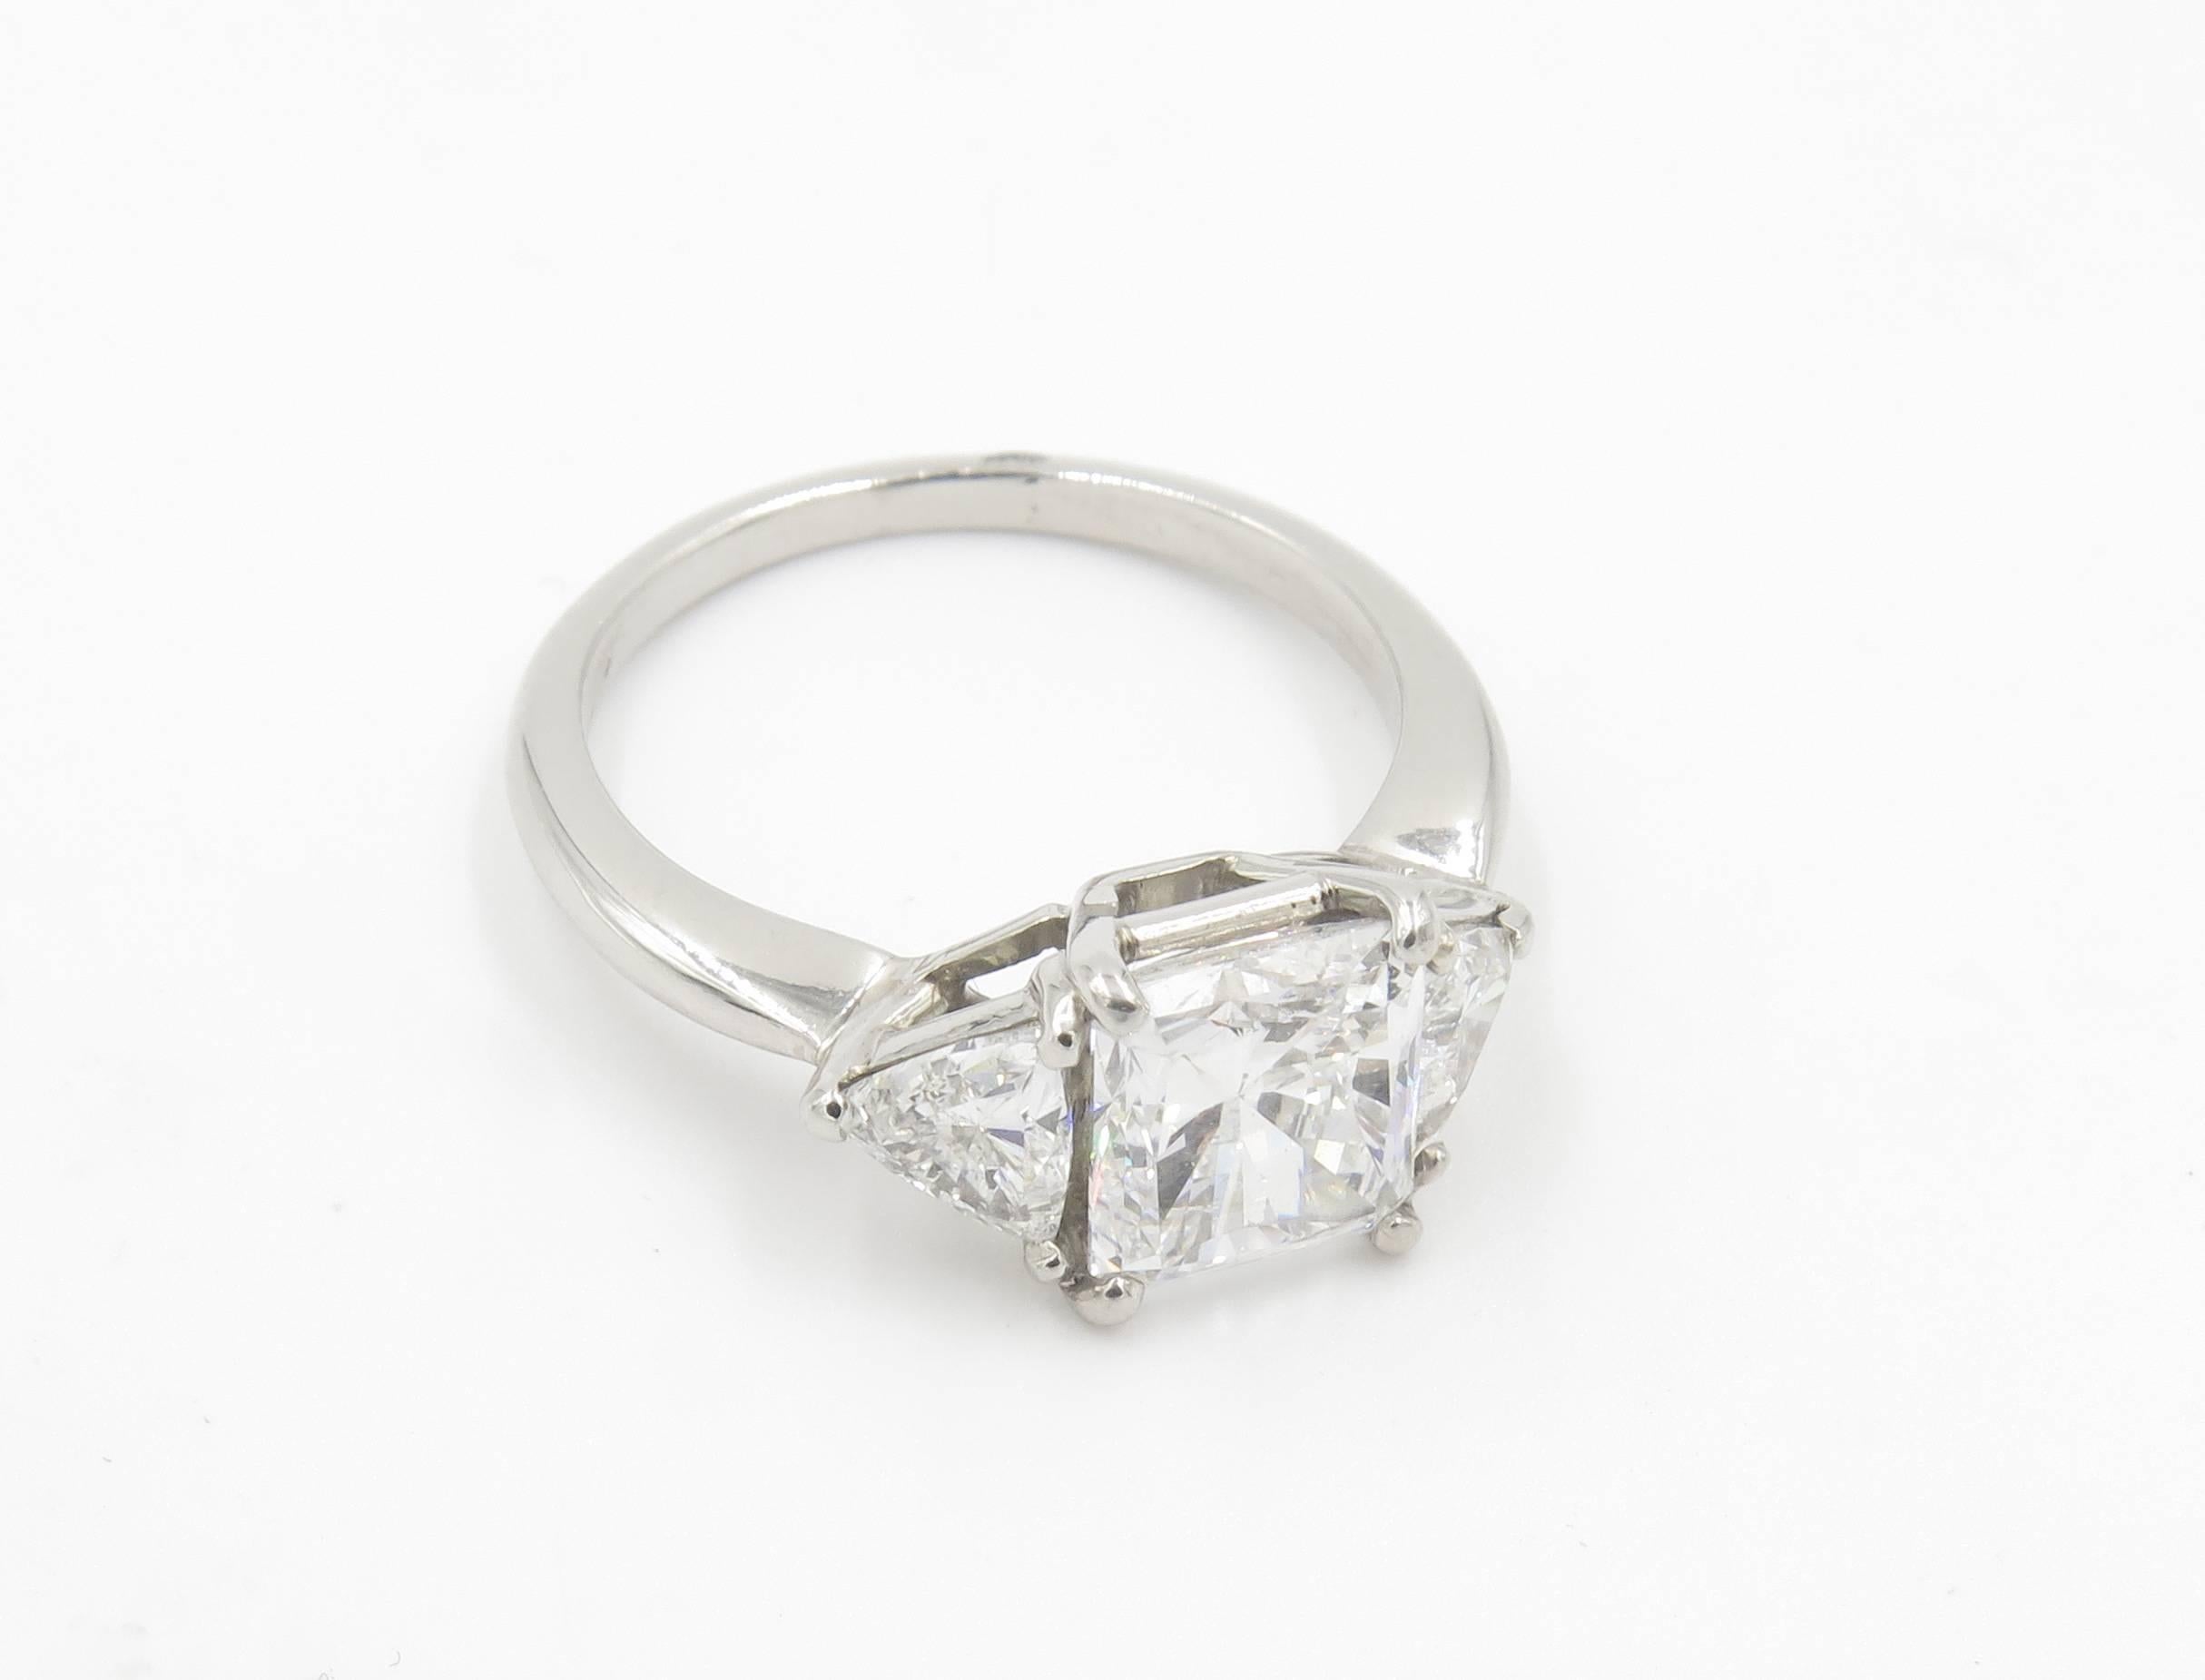 A platinum and diamond ring.  The ring centers a radiant cut diamond weighing 2.04 carats 
GIA Diamond Grading Report 5172281906, dated August 18, 2015, states Shape and Cutting Style Cut-Cornered Rectangular Modified Brilliant, Measurements 7.50 x